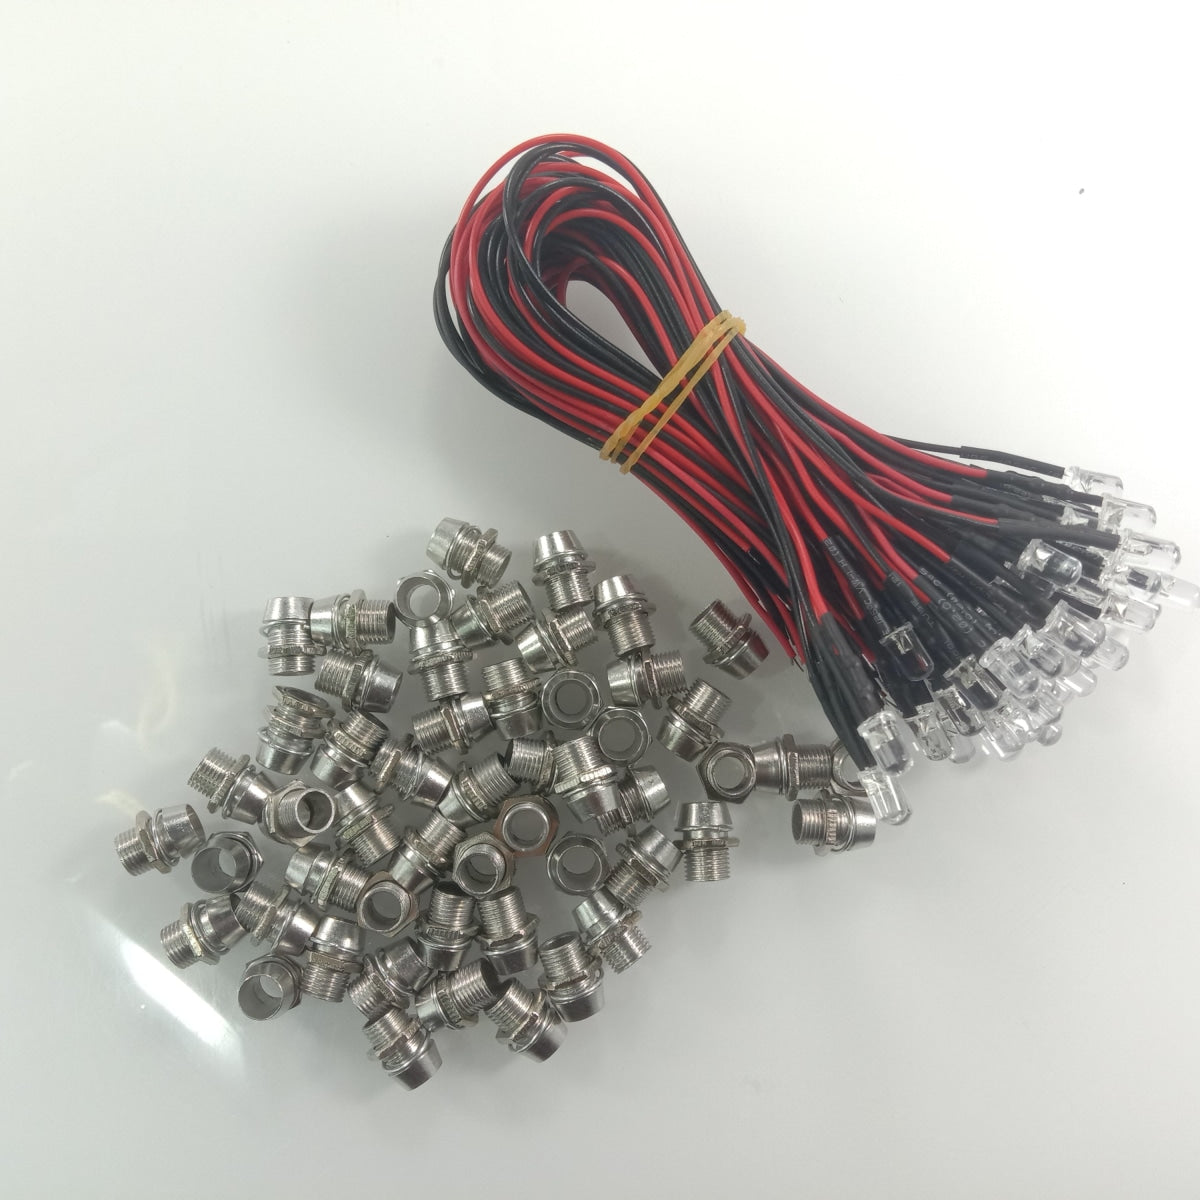 50Pcs Each 3Mm 12V Wired Leds + Chrome Metal Surrounds White Blue Green Uv Red Yellow Pink Cables